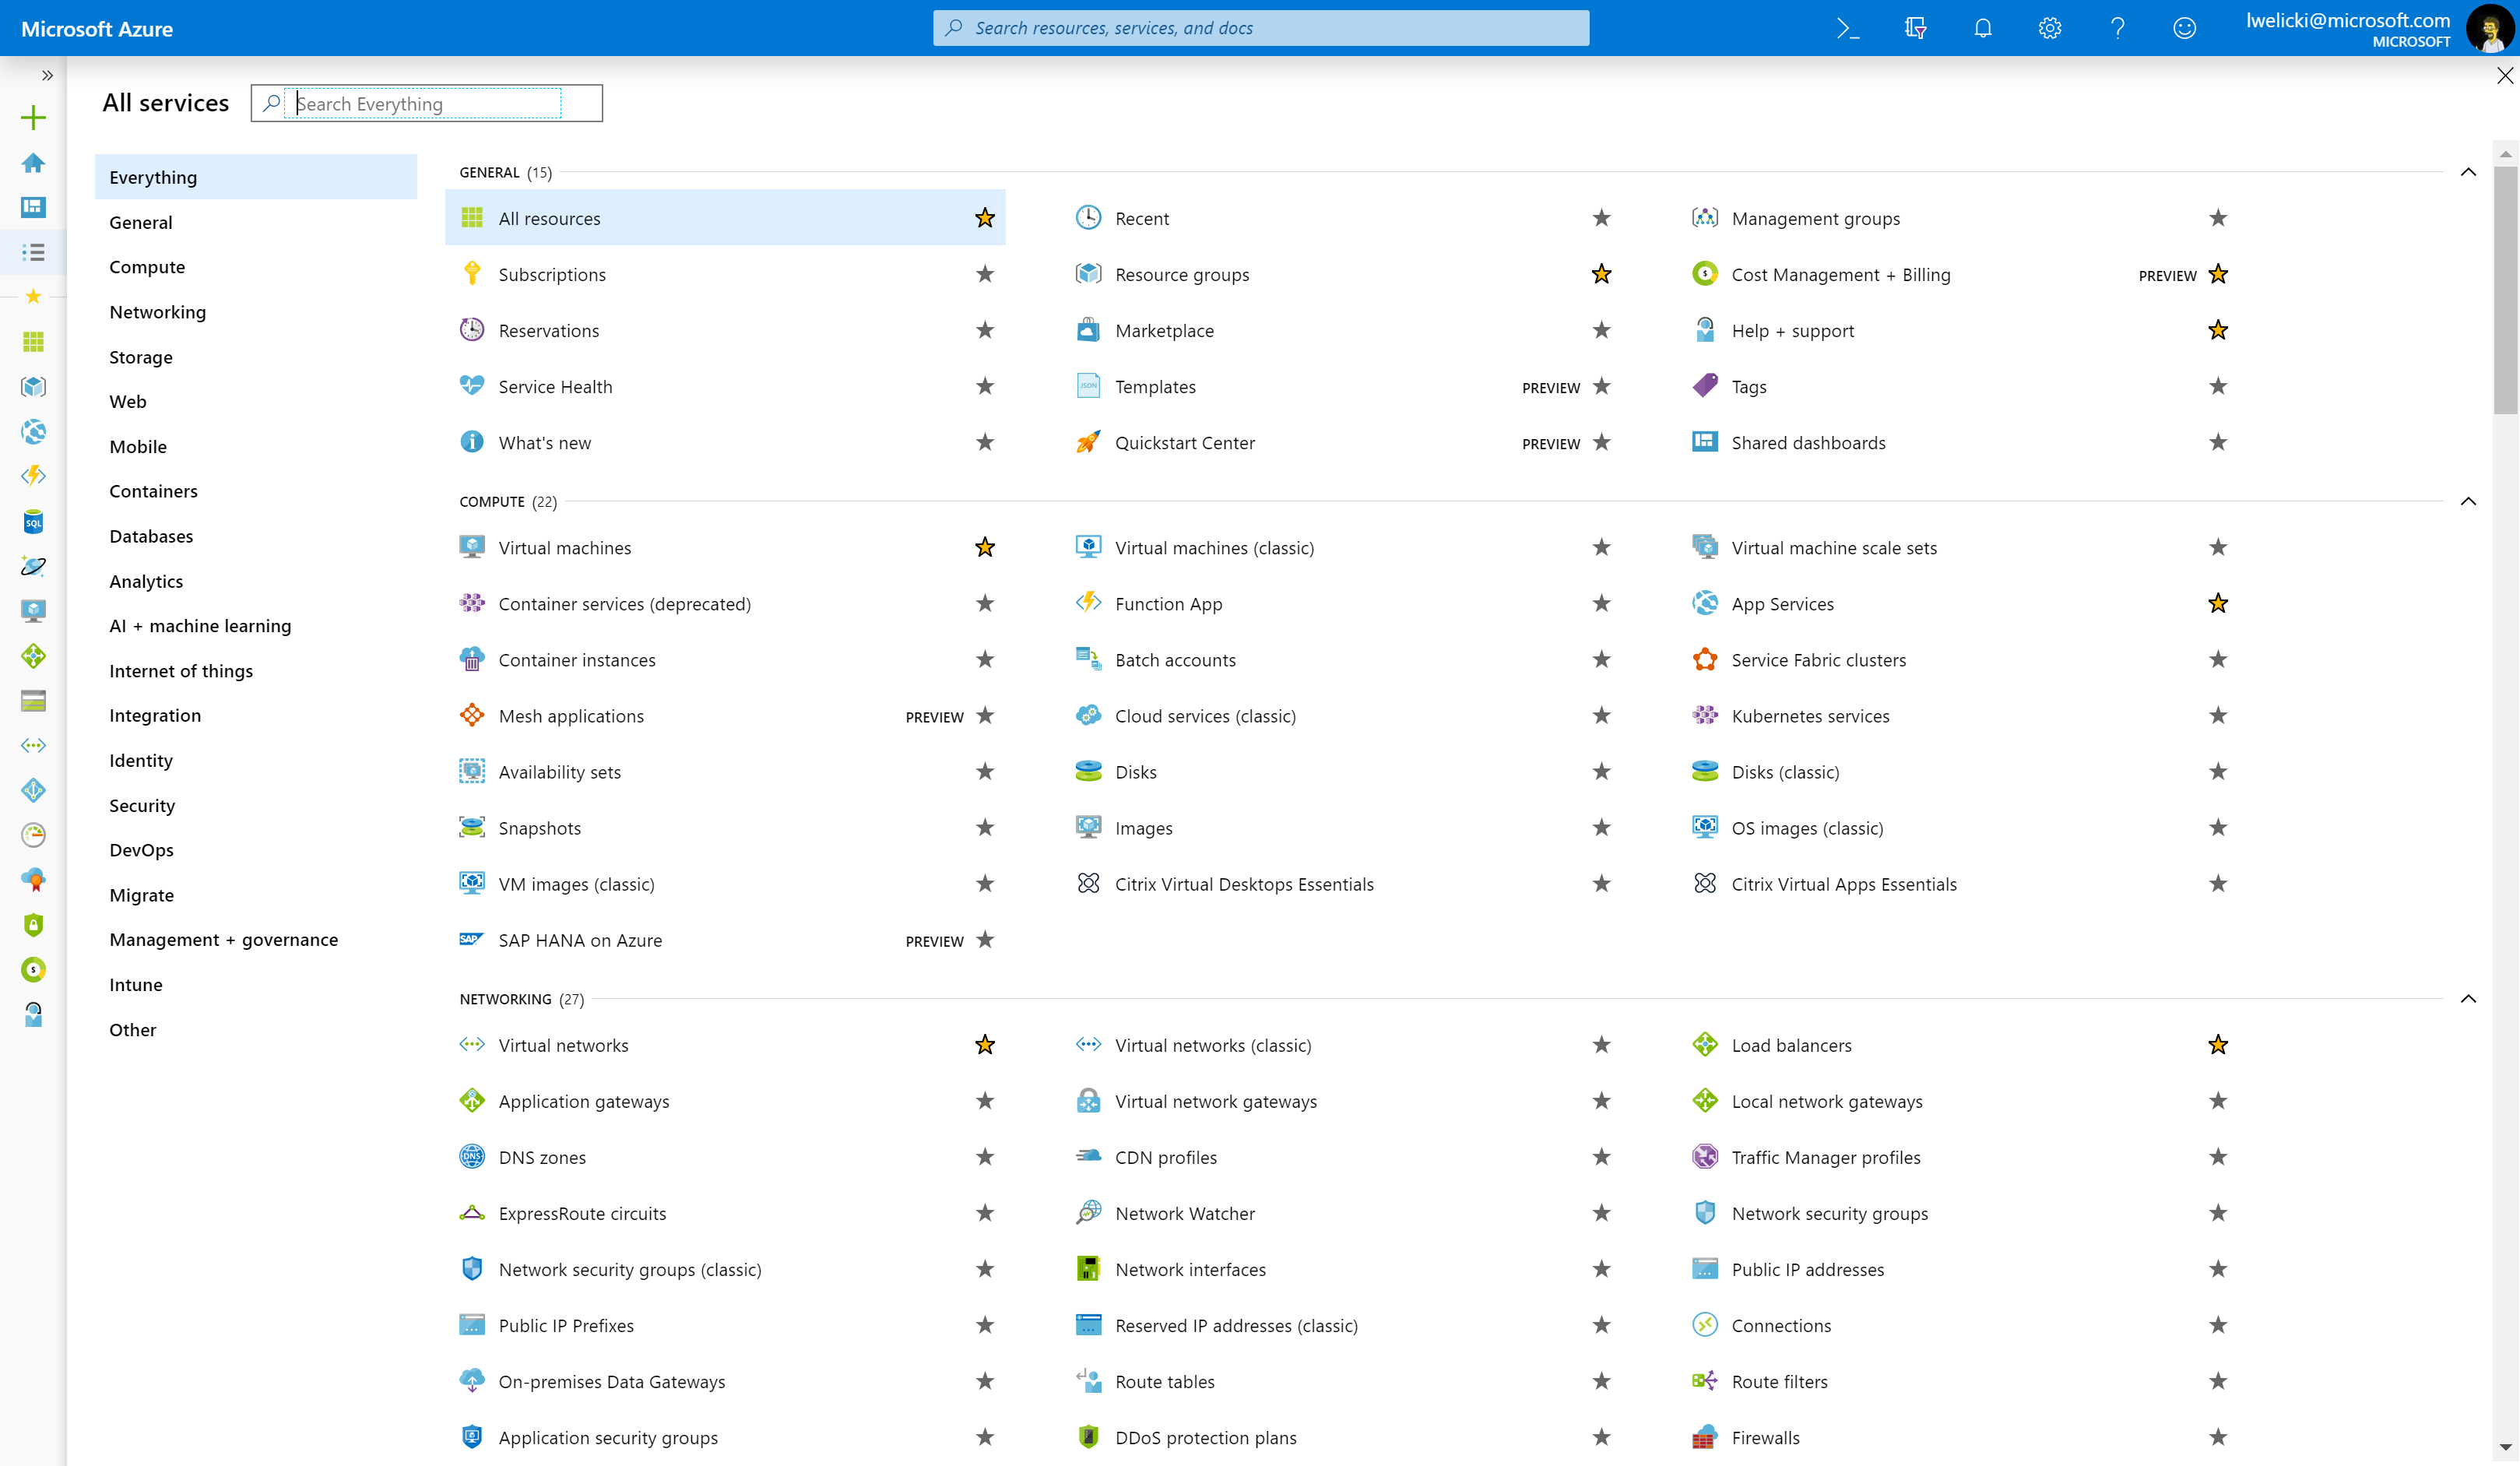 All services view in the Azure portal